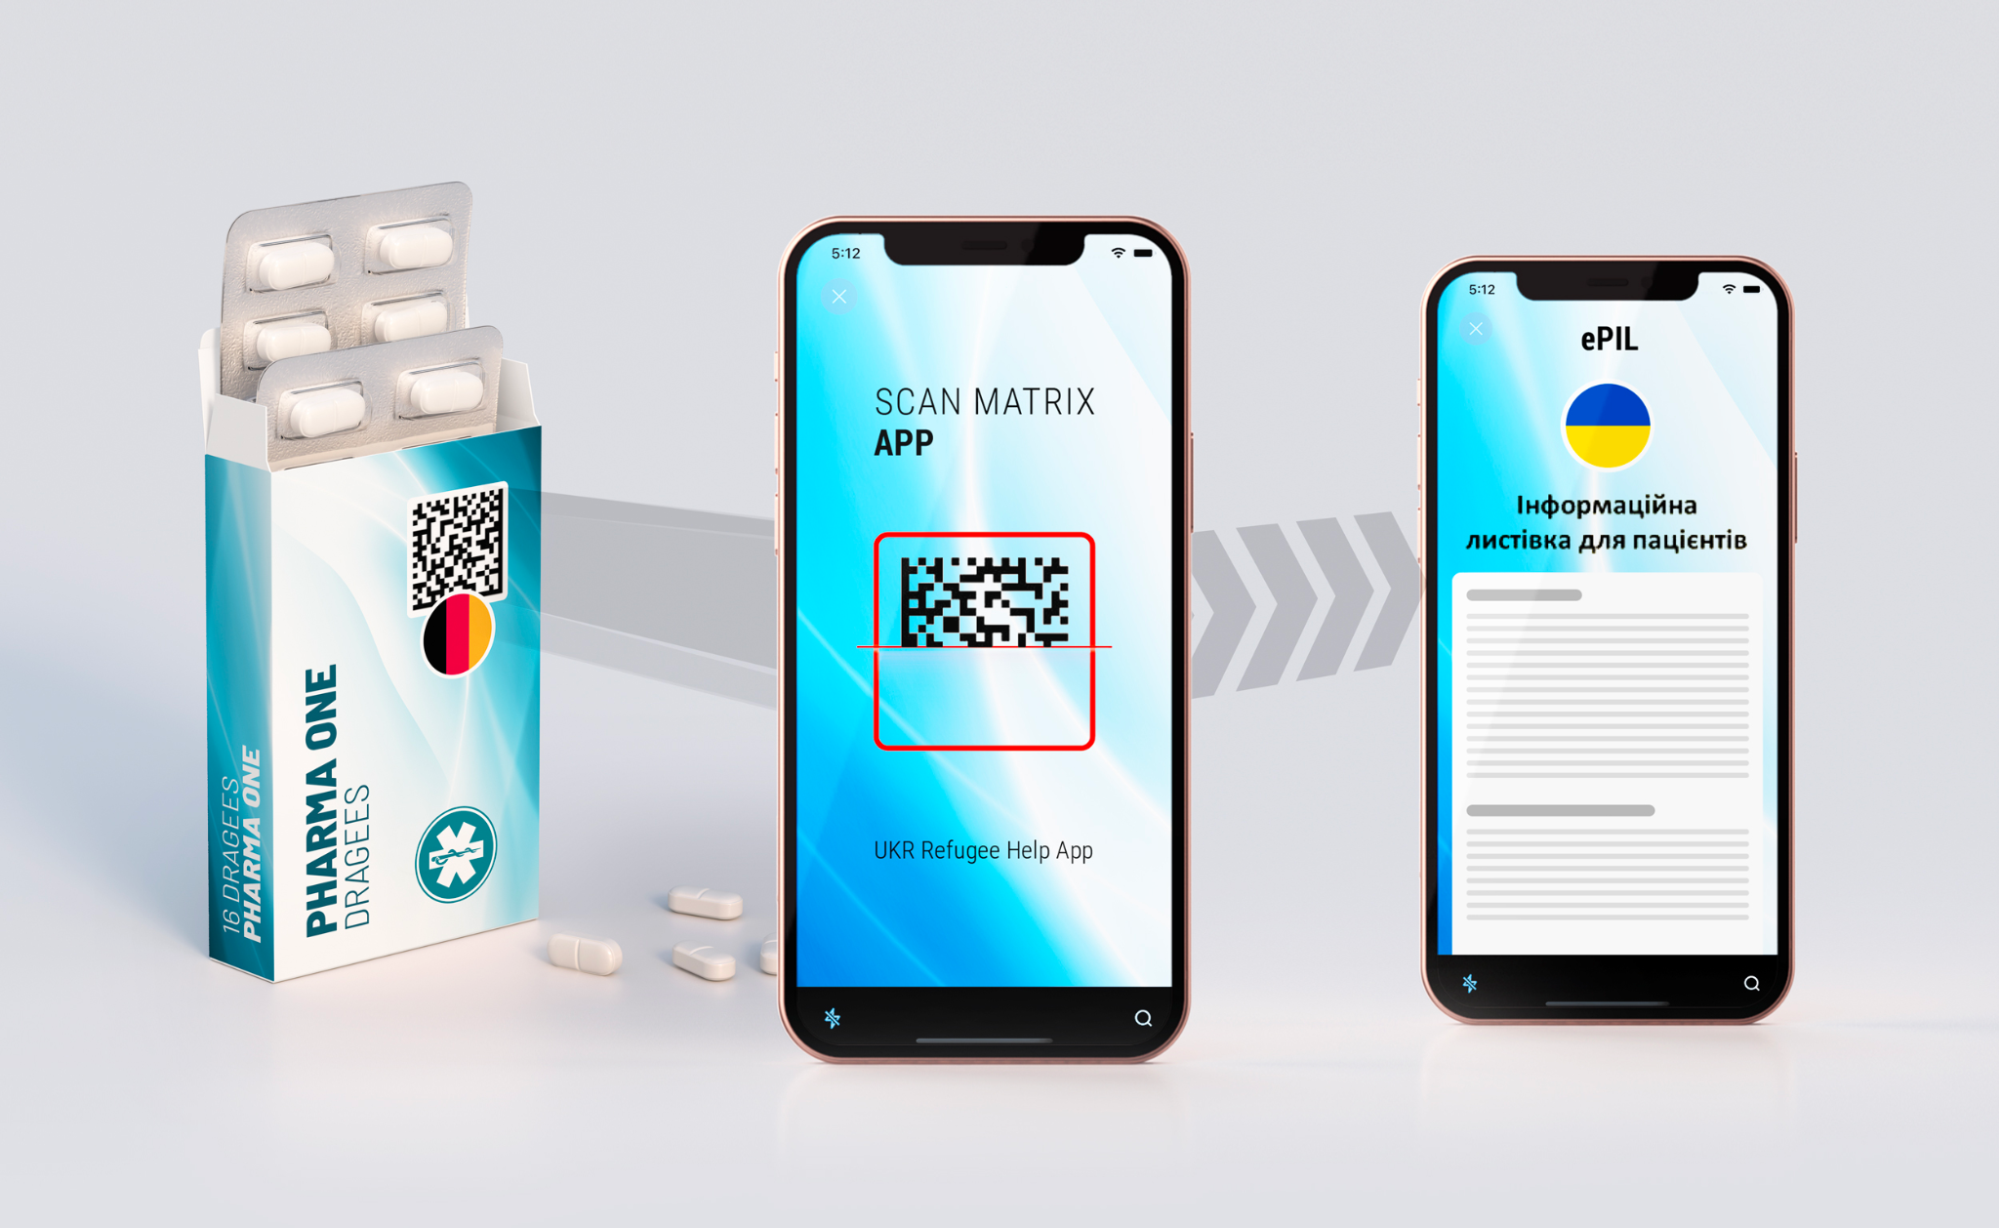 A smartphone scanning generic medication and receiving instructions in Ukrainian